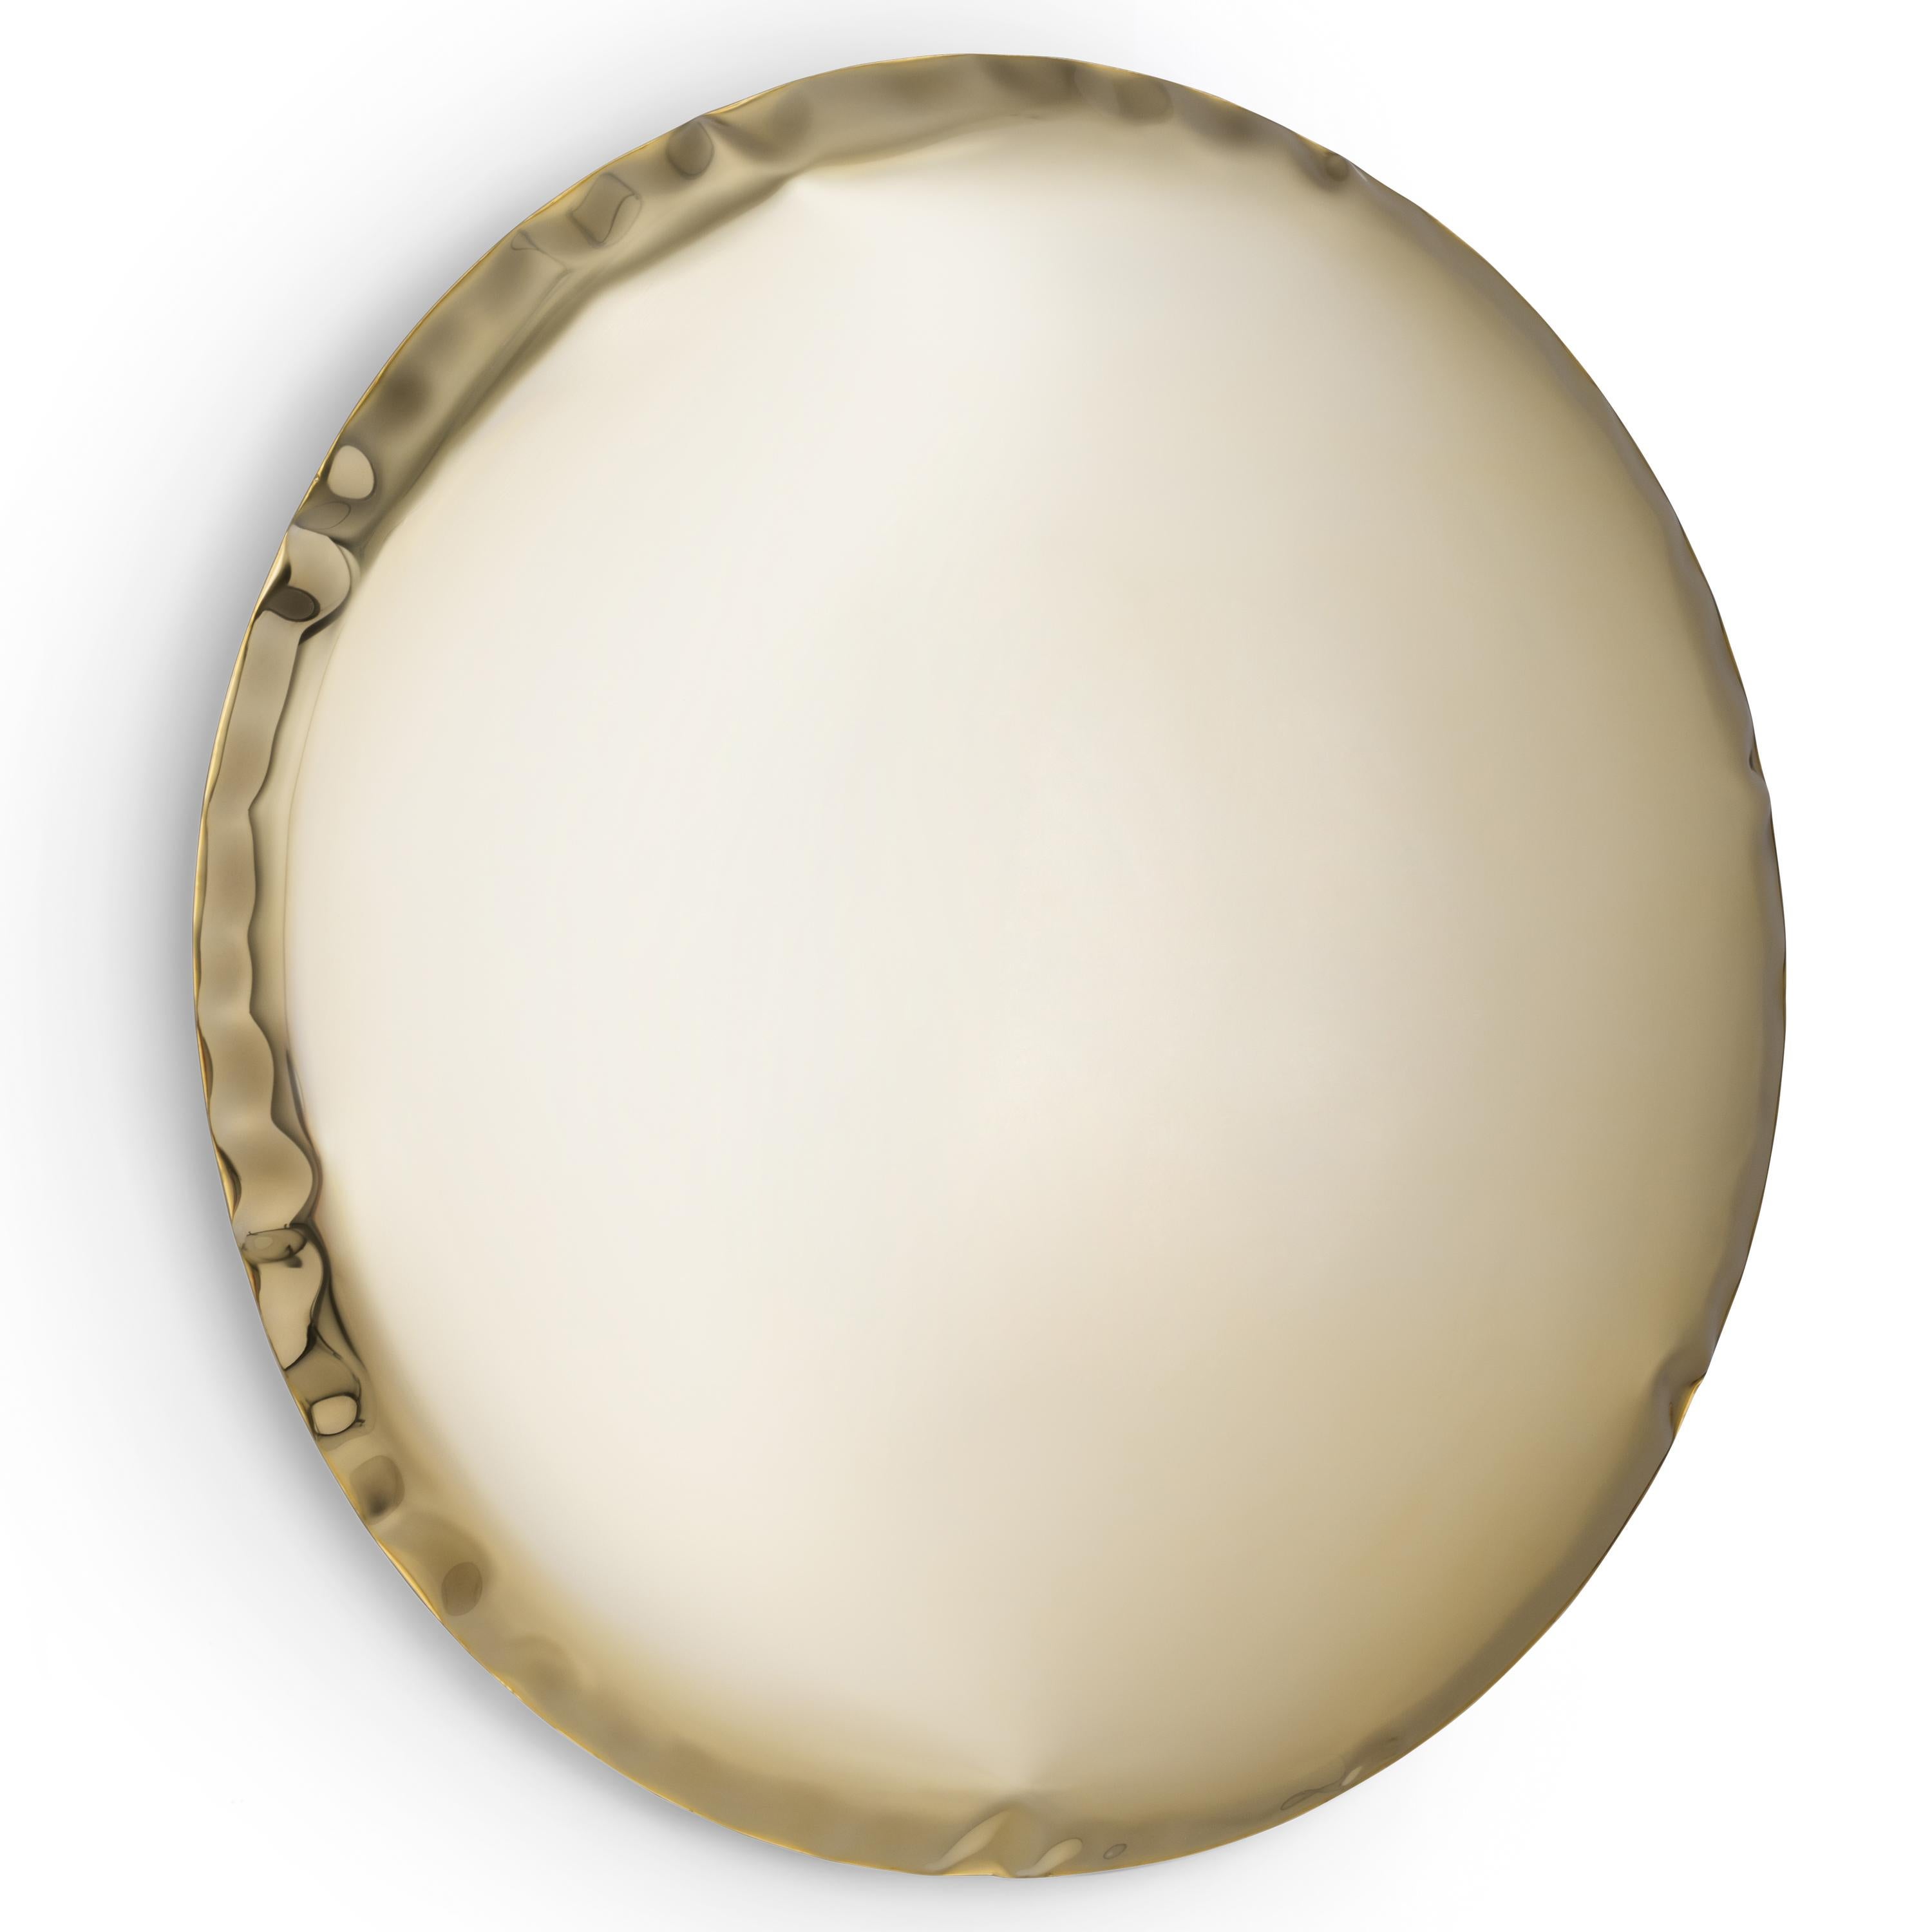 Stainless Steel Contemporary Mirror 'OKO 150', AURUM Collection, Classic Gold, by Zieta For Sale